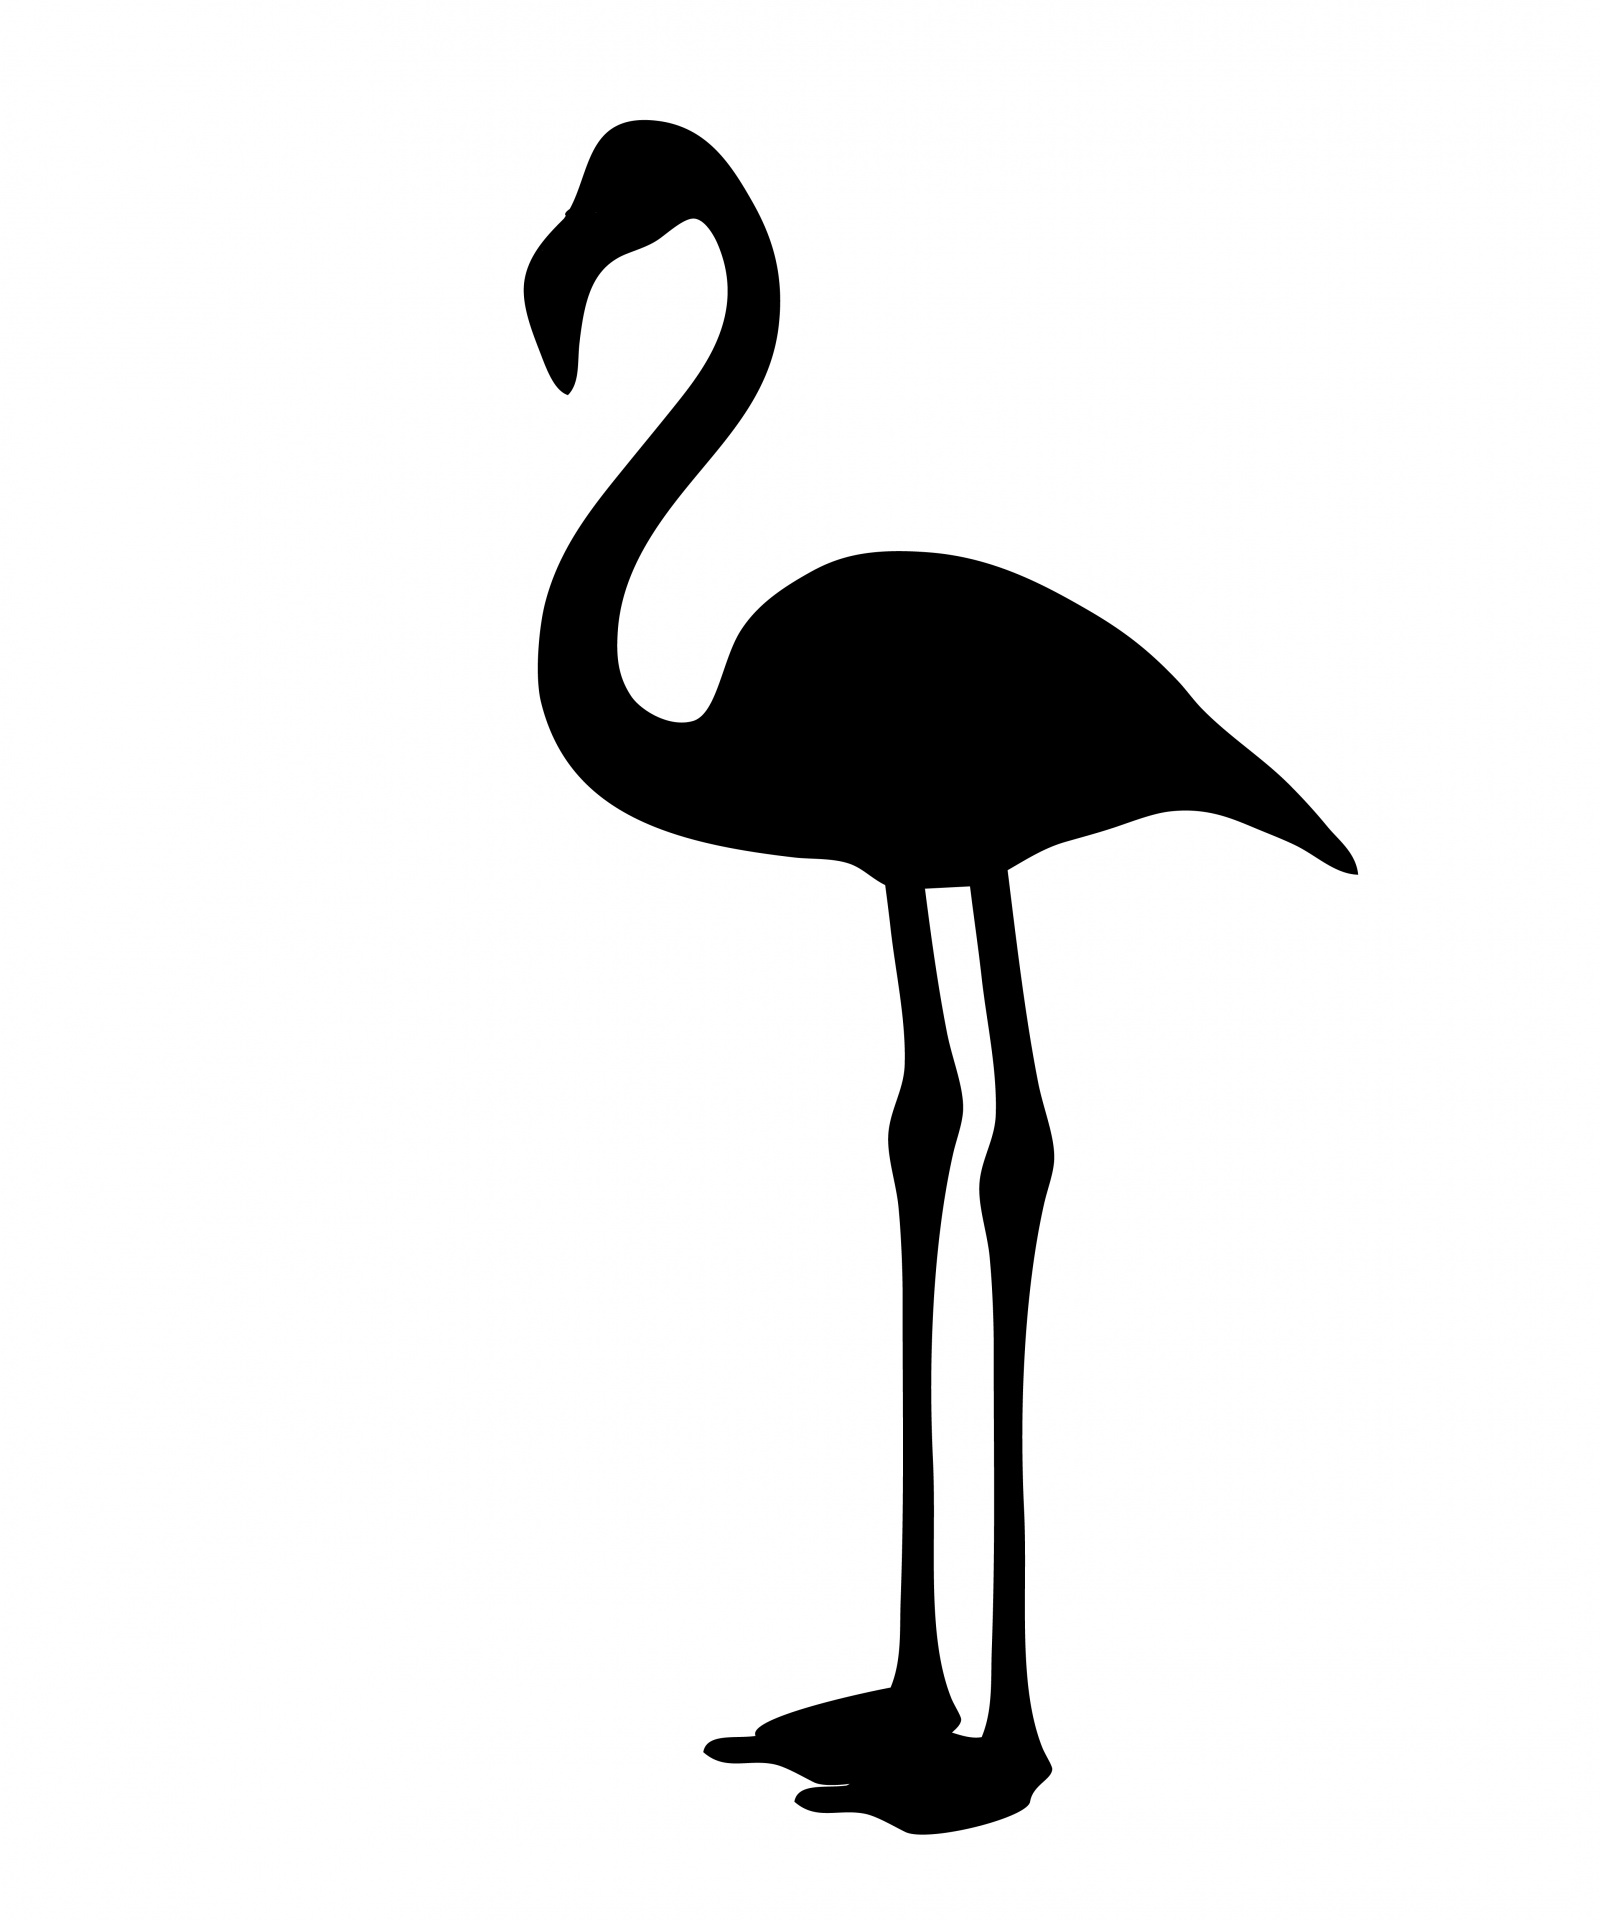 Download free photo of Flamingo,bird,silhouette,black,clipart from